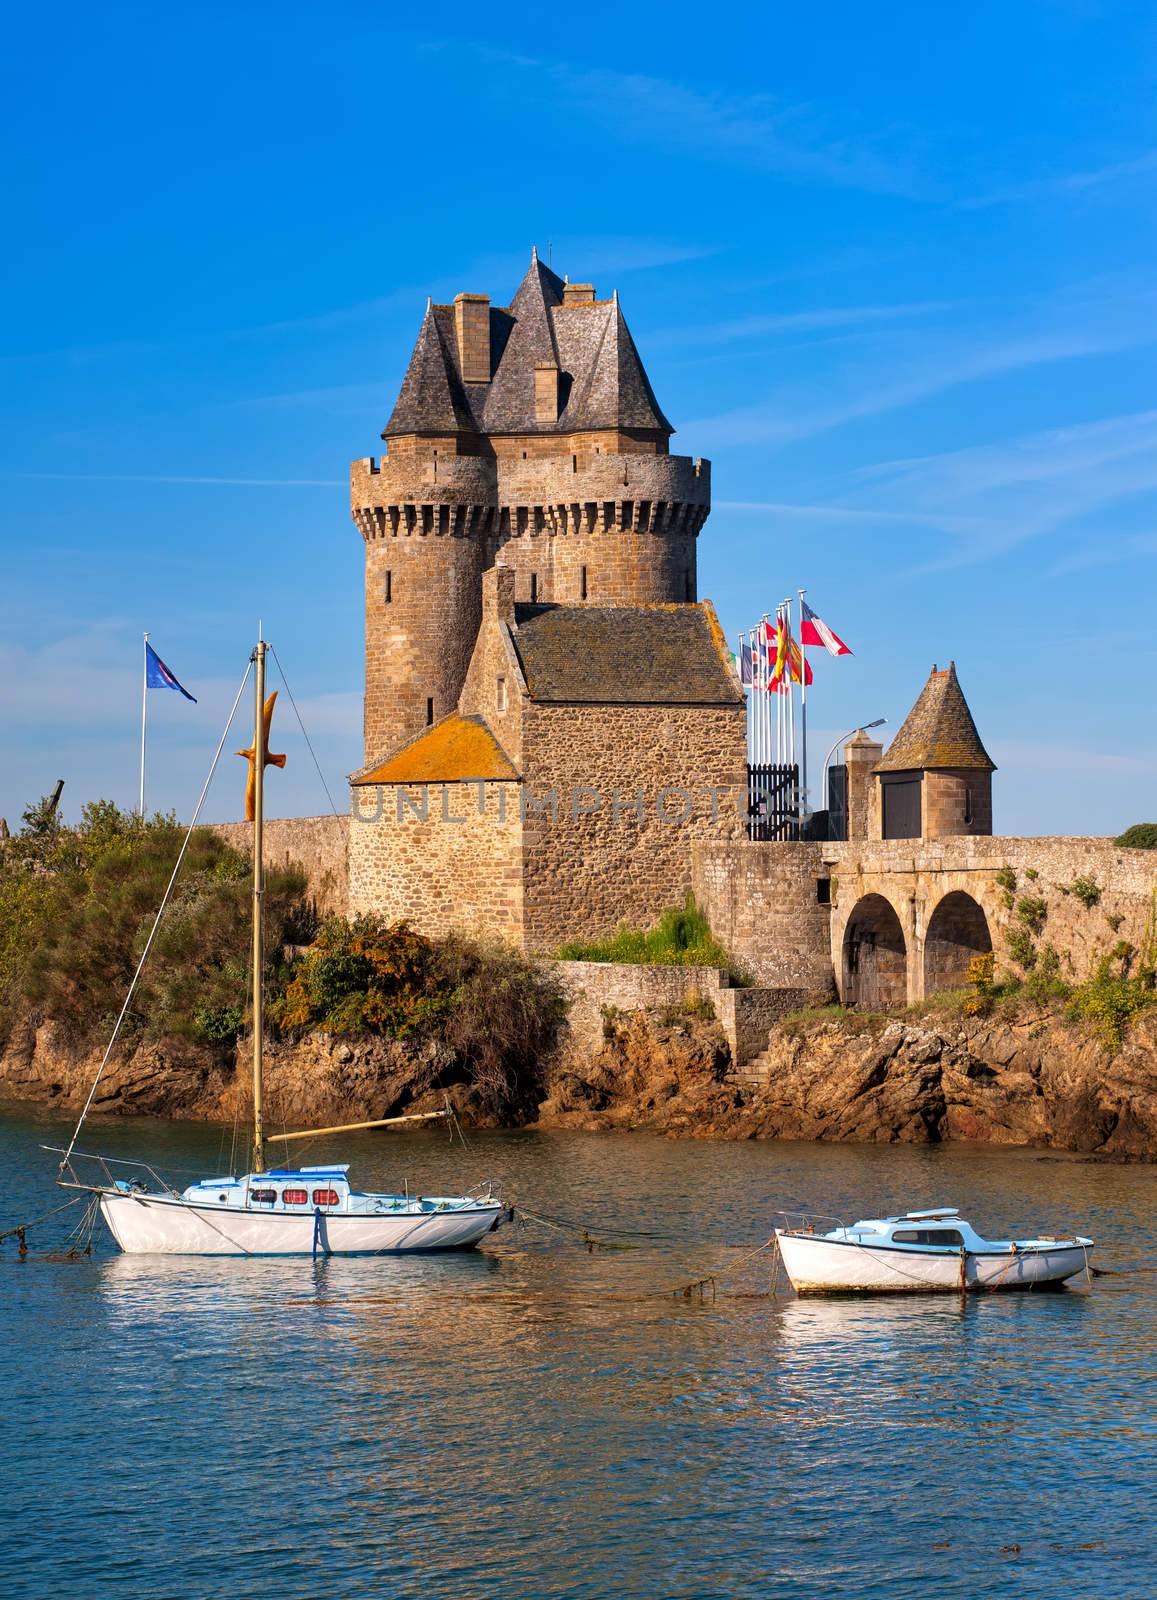 Solidor Tower, Saint-Malo, Brittany, France by GlobePhotos